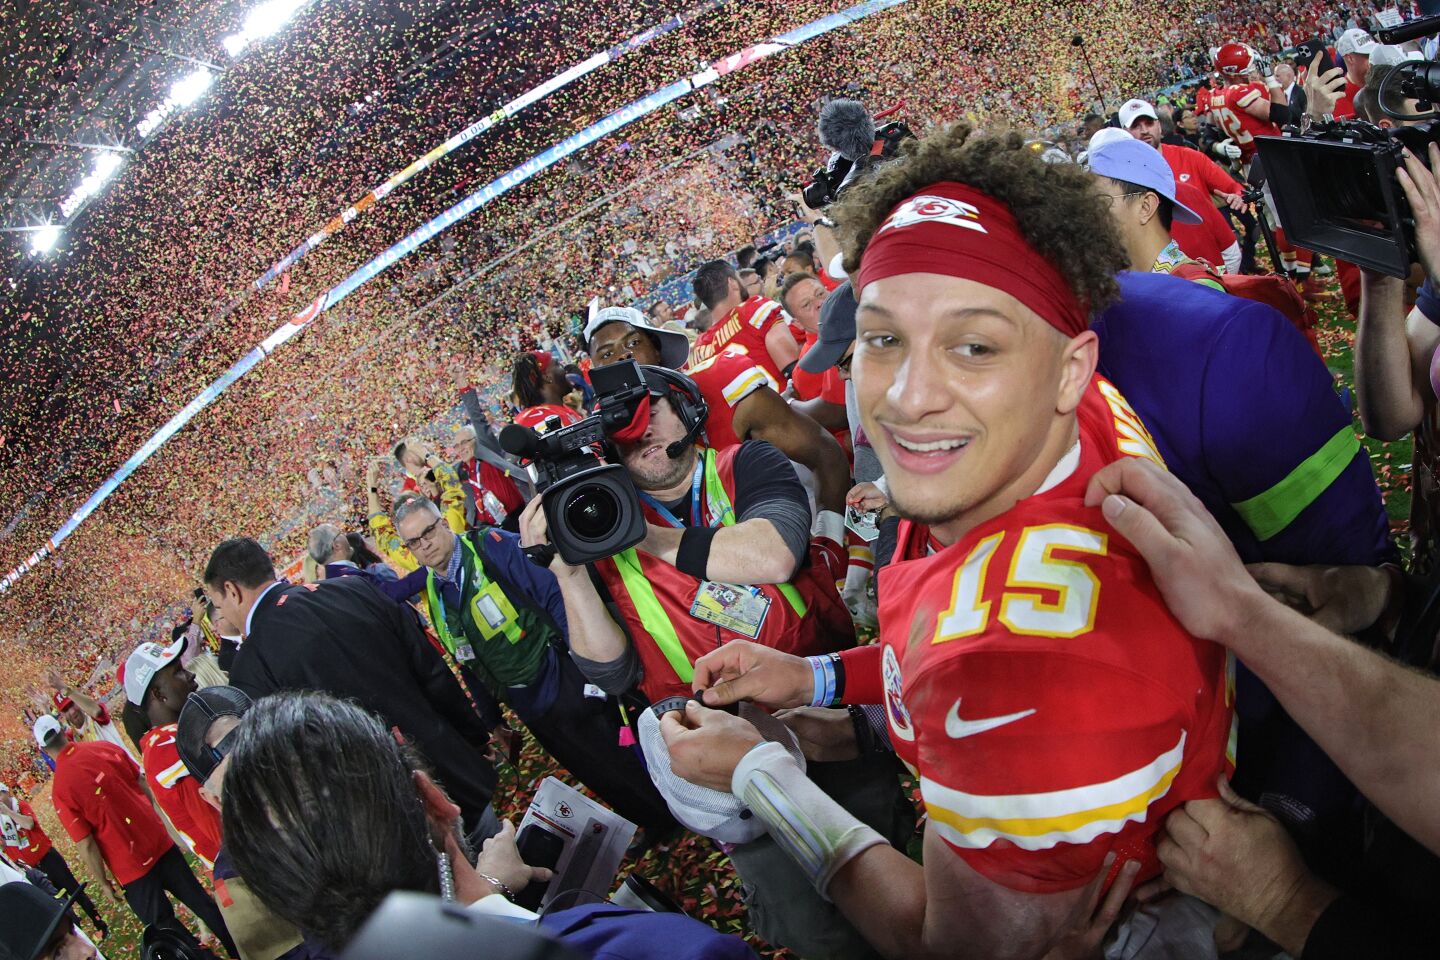 Kansas City Chiefs quarterback Patrick Mahomes celebrates after the team's victory over the San Francisco 49ers in Super Bowl LIV. Mahomes was named the game's MVP.